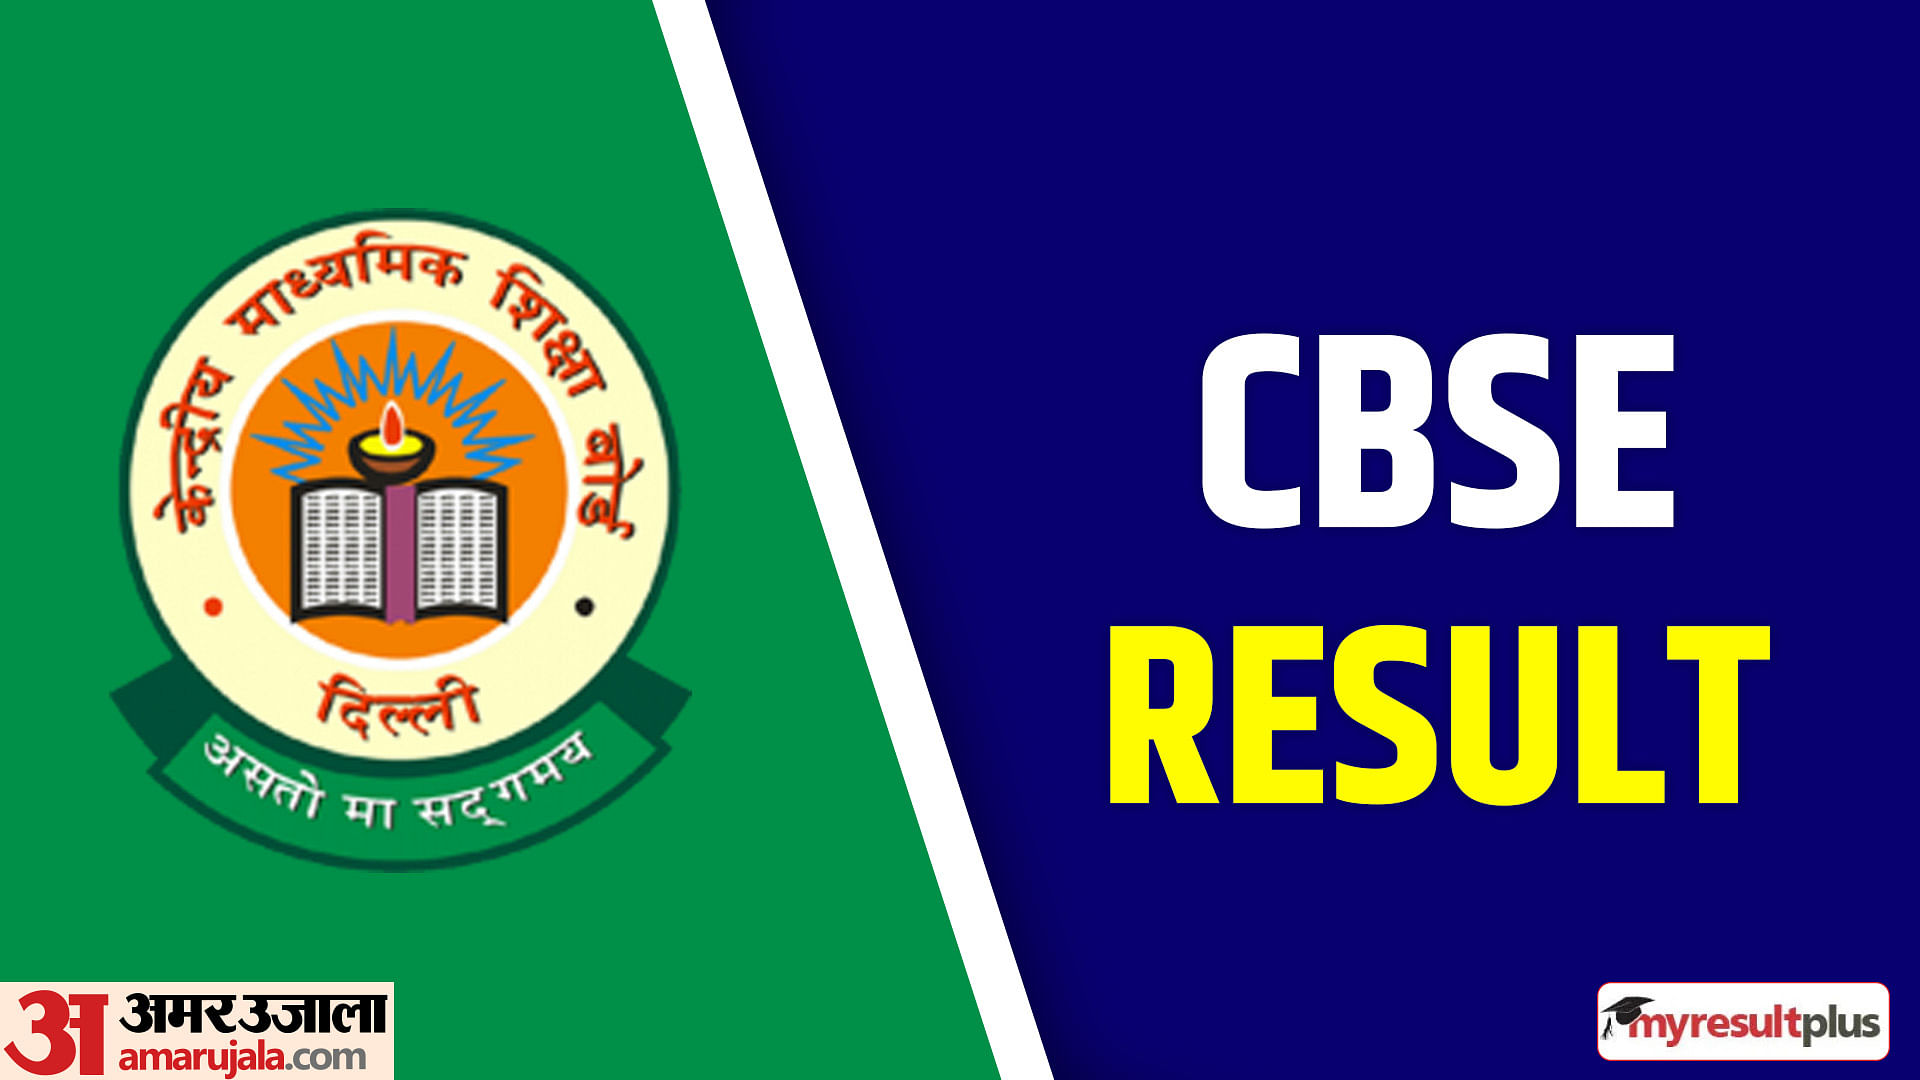 CBSE Toppers List 2023 : Why CBSE Does Not Release Toppers List? Check the Reason Here